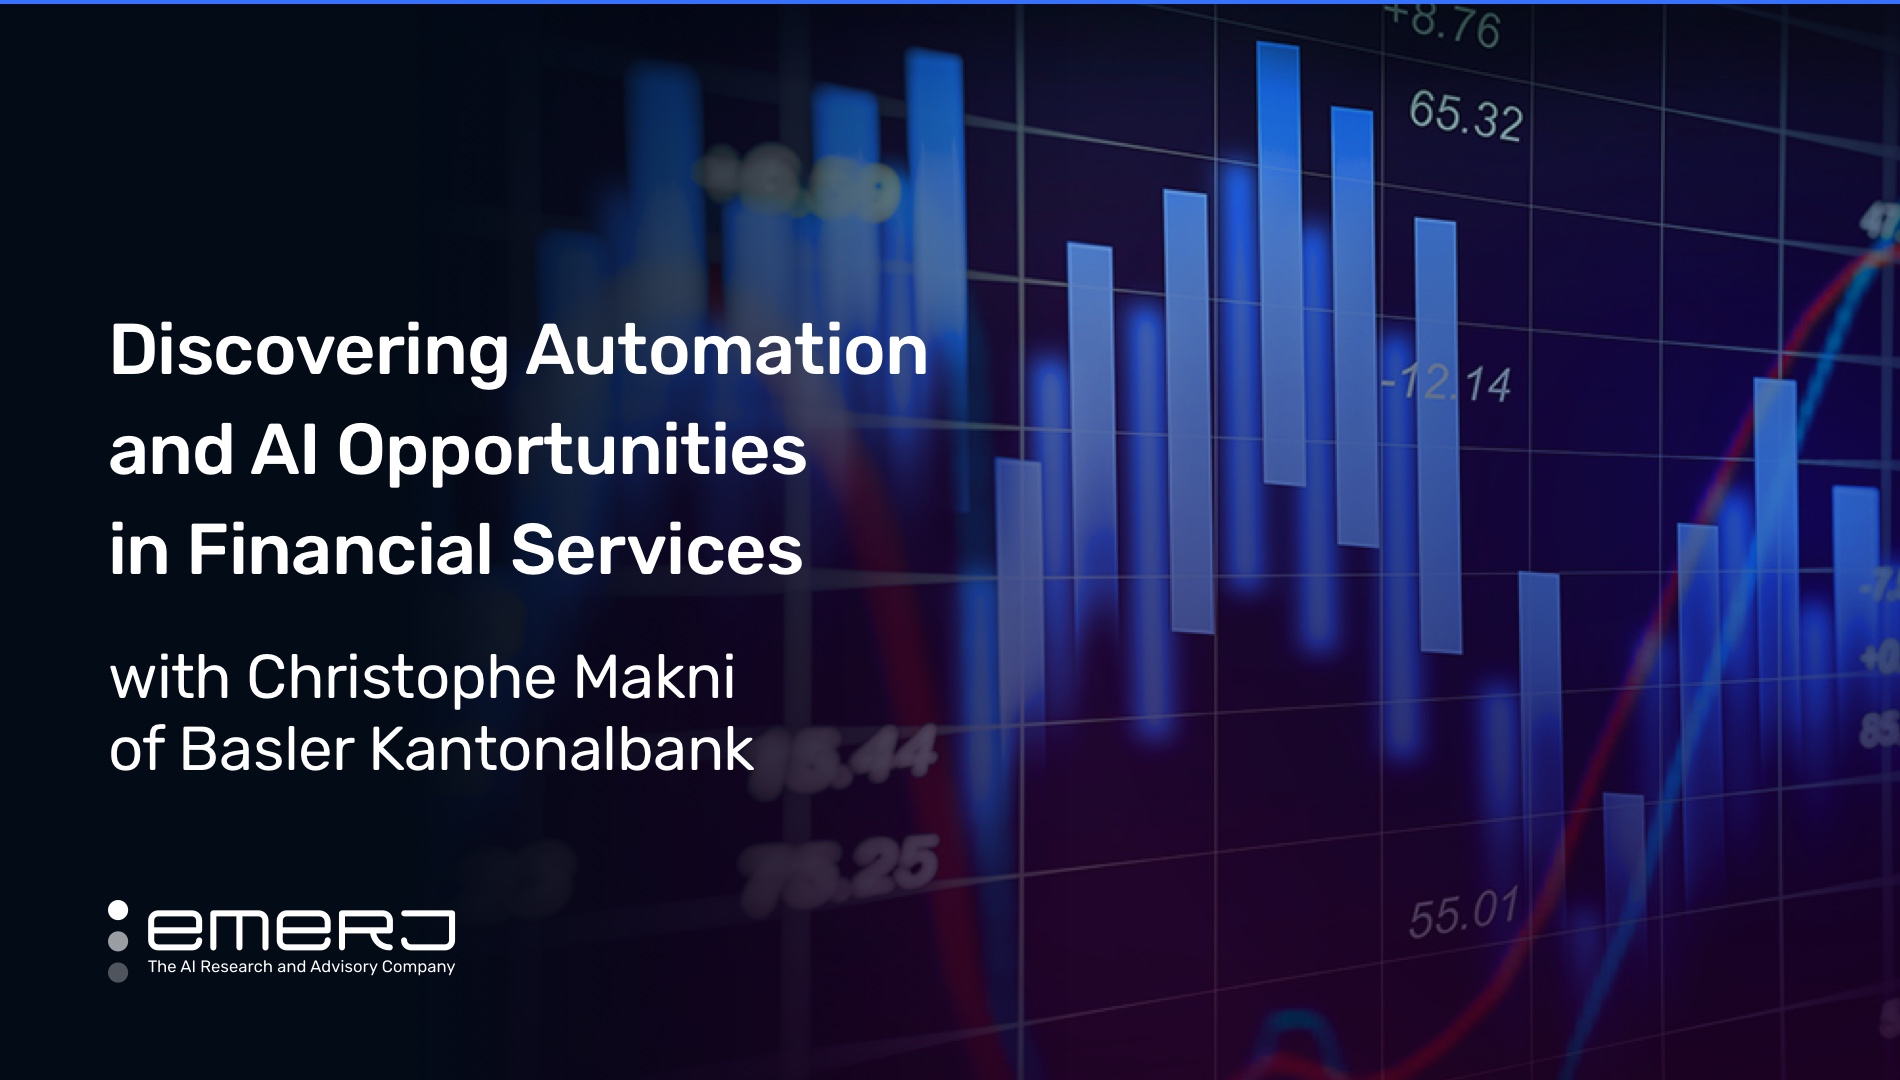 Discovering Automation and AI Opportunities in Financial Services – with Christophe Makni of Basler Kantonalbank